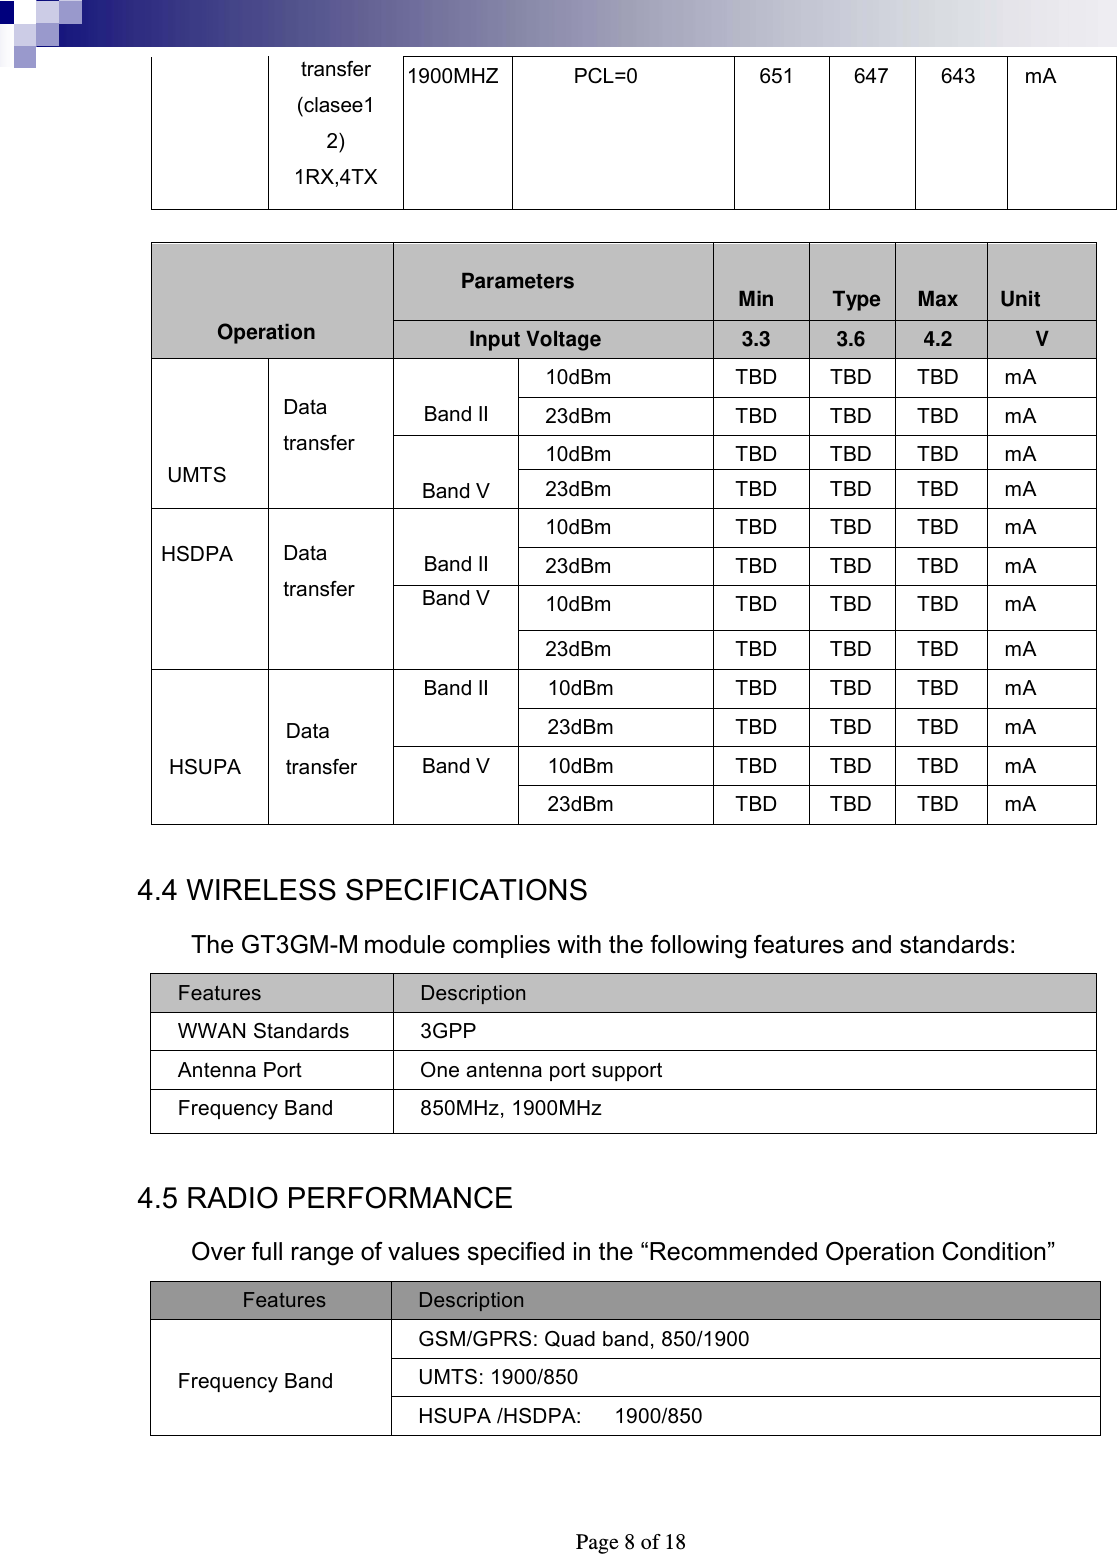  Page 8 of 18 transfer (clasee12) 1RX,4TX 1900MHZ PCL=0 651 647 643 mA                             Operation  Min  Type  Max  Unit Parameters Input Voltage 3.3 3.6 4.2 V    UMTS  Data transfer  Band II 10dBm TBD TBD TBD mA 23dBm TBD TBD TBD mA  Band V 10dBm TBD TBD TBD mA 23dBm TBD TBD TBD mA  HSDPA  Data transfer  Band II 10dBm TBD TBD TBD mA 23dBm TBD TBD TBD mA Band V 10dBm TBD TBD TBD mA 23dBm TBD TBD TBD mA   HSUPA  Data transfer Band II 10dBm TBD TBD TBD mA 23dBm TBD TBD TBD mA Band V 10dBm TBD TBD TBD mA 23dBm TBD TBD TBD mA  4.4 WIRELESS SPECIFICATIONS The GT3GM-M module complies with the following features and standards: Features  Description WWAN Standards  3GPP Antenna Port  One antenna port support Frequency Band  850MHz, 1900MHz  4.5 RADIO PERFORMANCE Over full range of values specified in the “Recommended Operation Condition” Features  Description  Frequency Band GSM/GPRS: Quad band, 850/1900 UMTS: 1900/850 HSUPA /HSDPA:   1900/850  